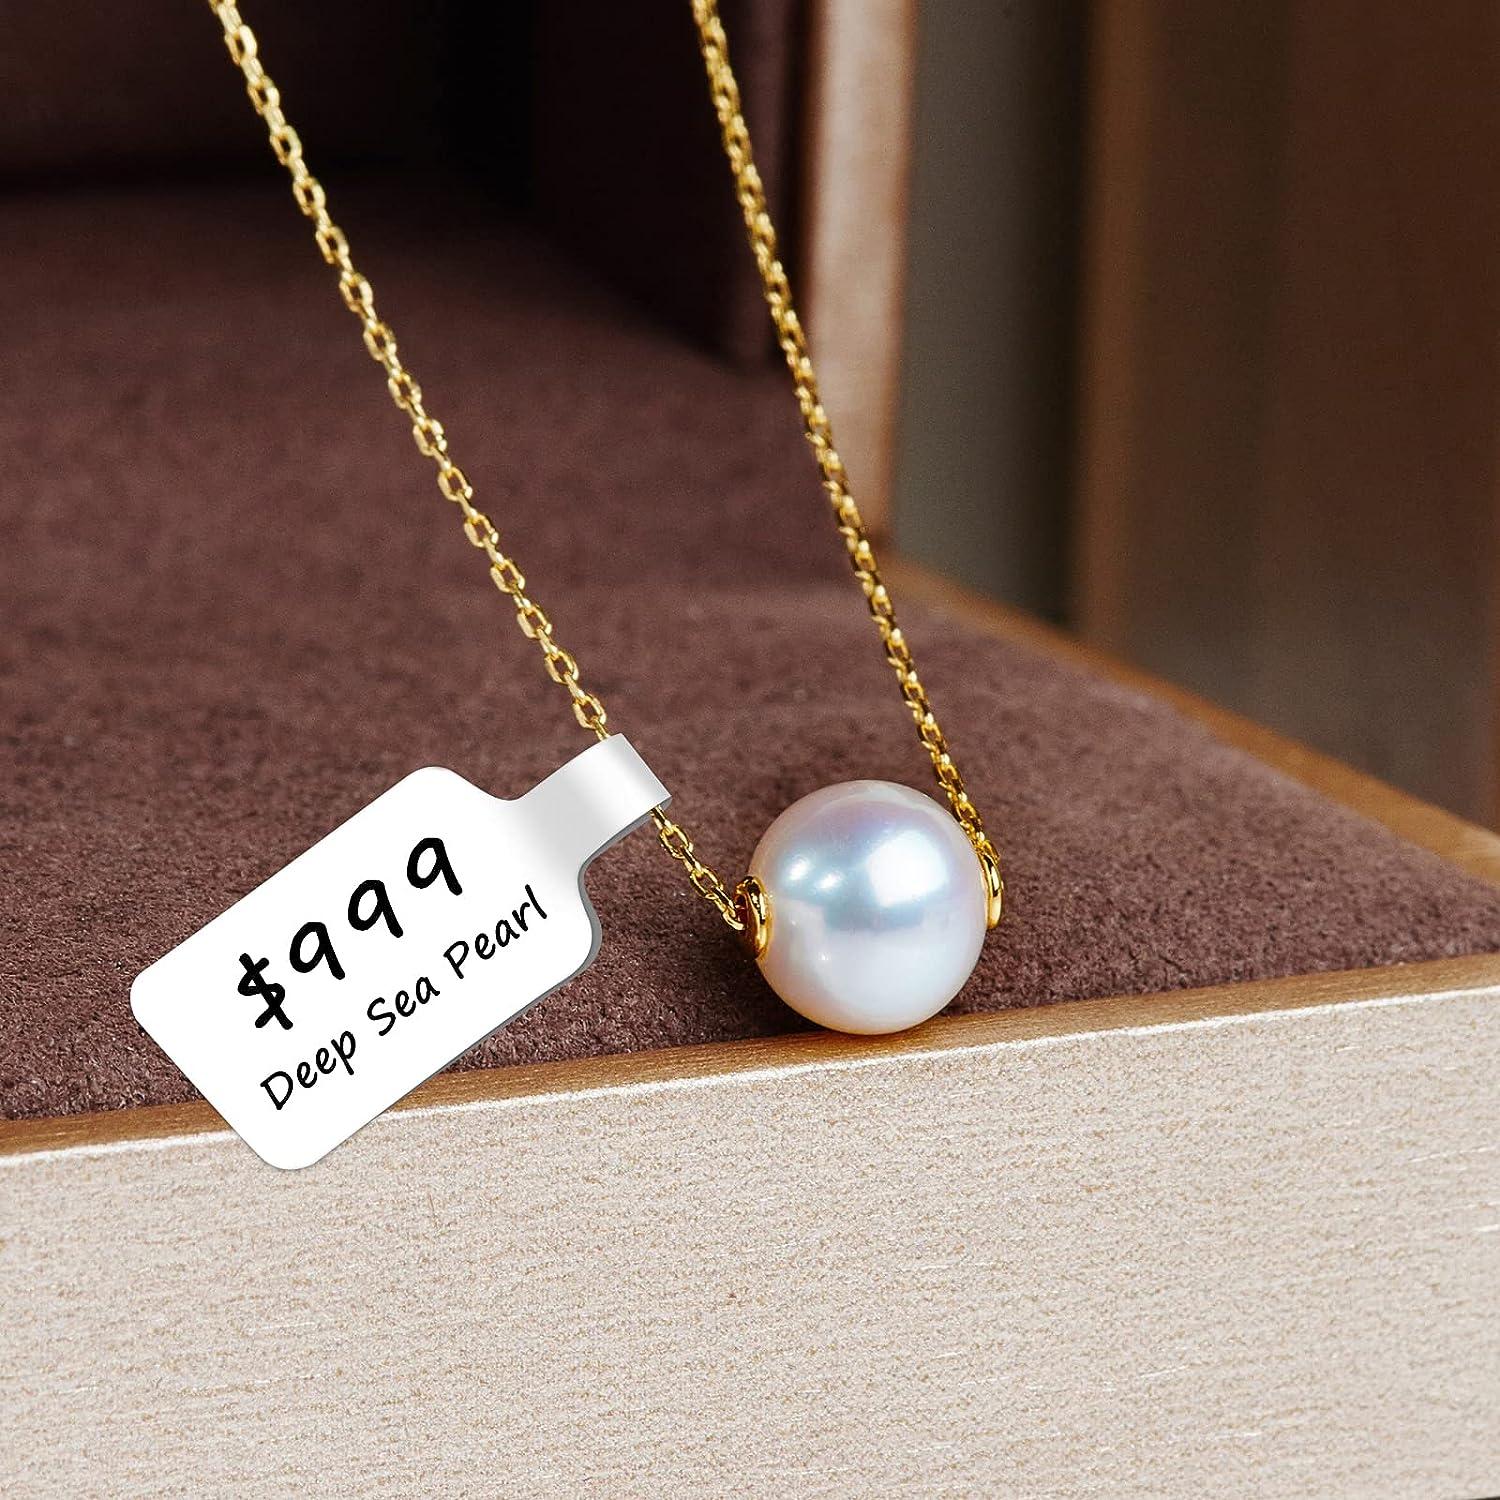 Setaria Viridis Blank Jewelry Price Label 500 Pieces Jewelry Price Tags Stickers Self Adhesive White Jewelry Repair Label for Necklace Earring Price